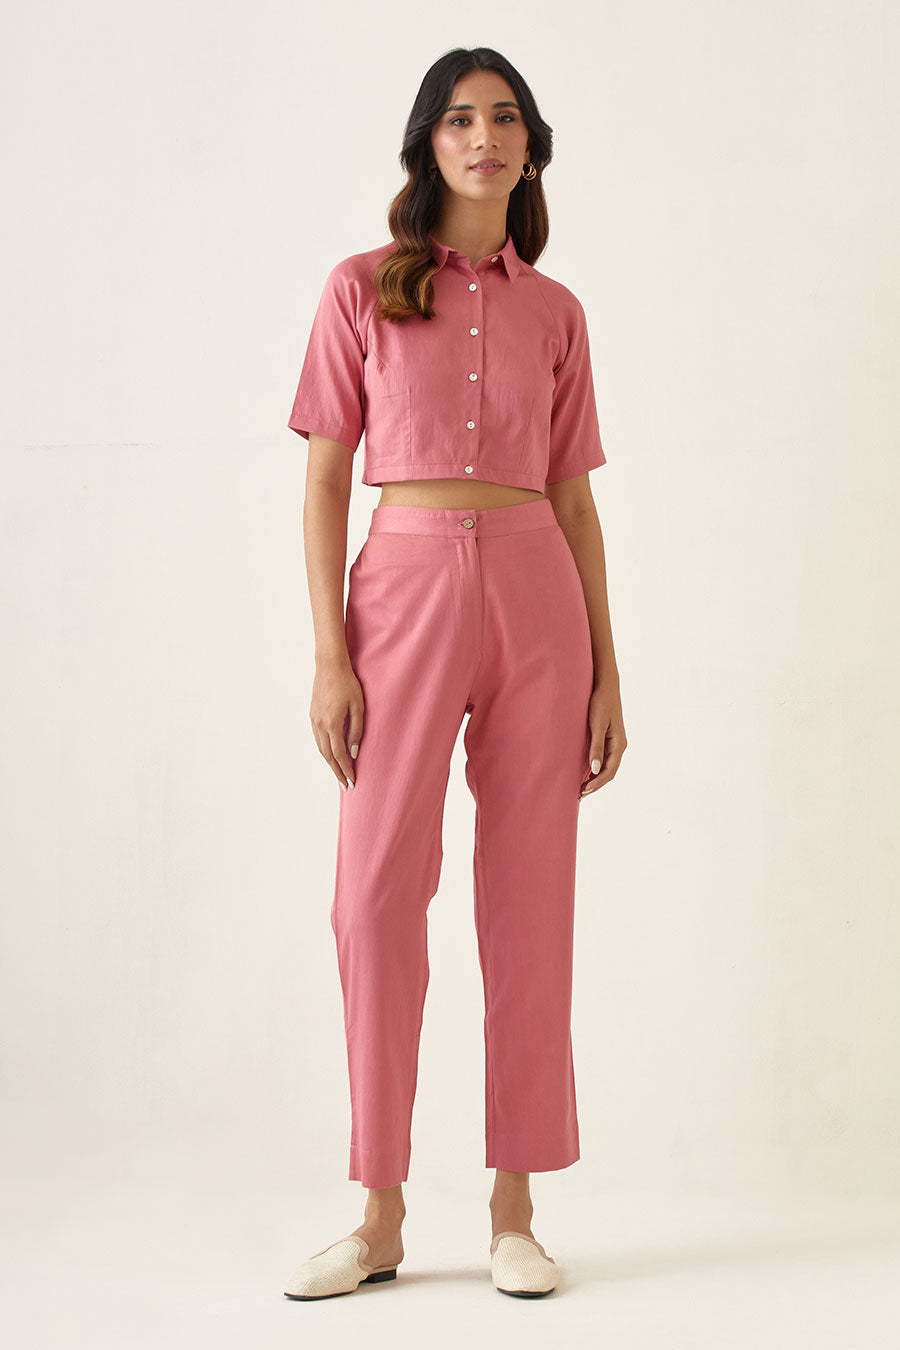 Rose Pink Crop Top with Pleated Pant Co-ord Set